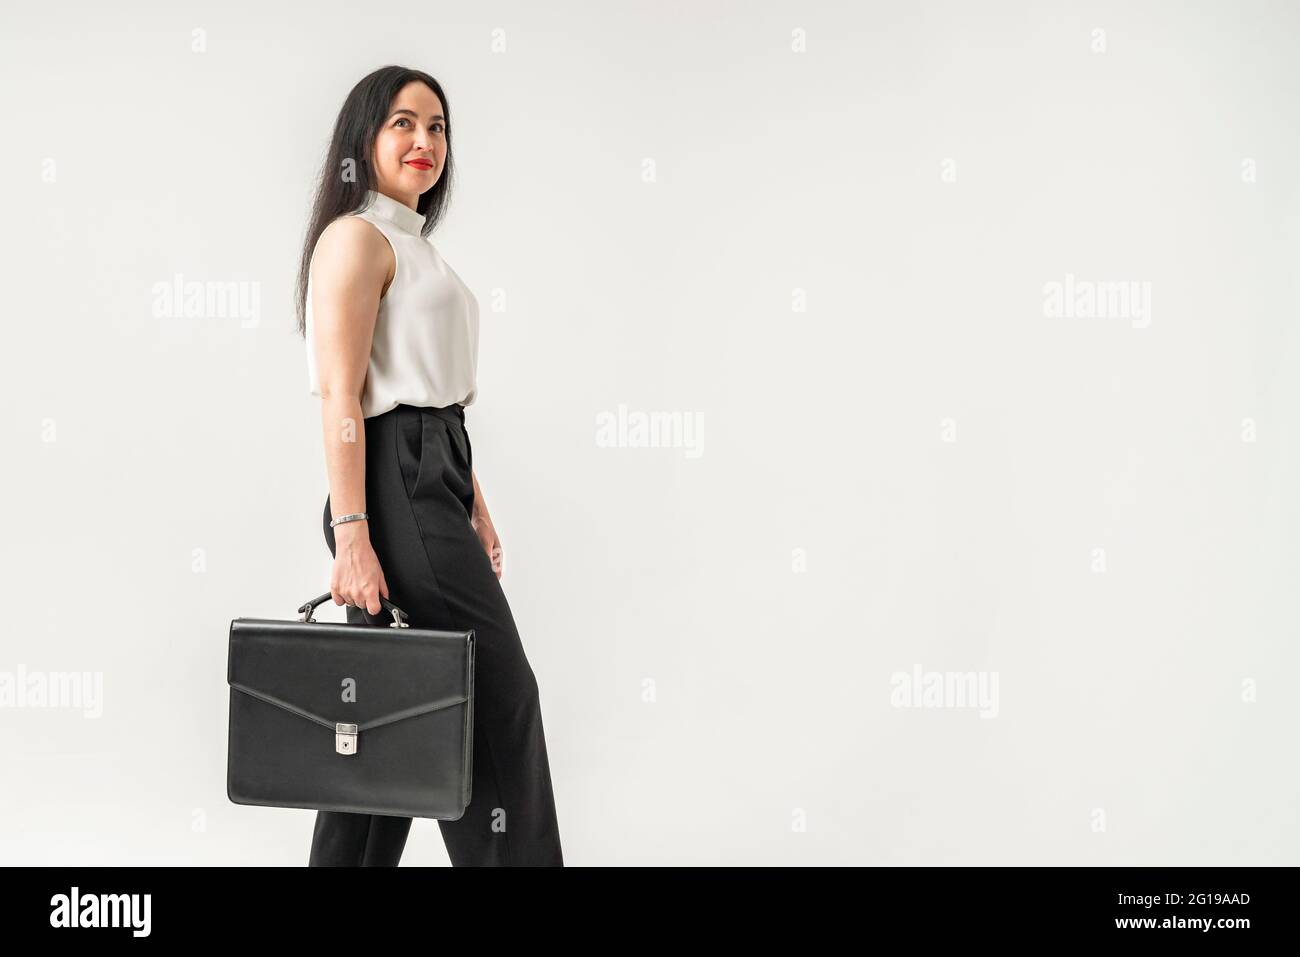 Portrait of confident young businesswoman stand forefront looking at camera, successful millennial female ceo or boss posing for picture in office. Stock Photo